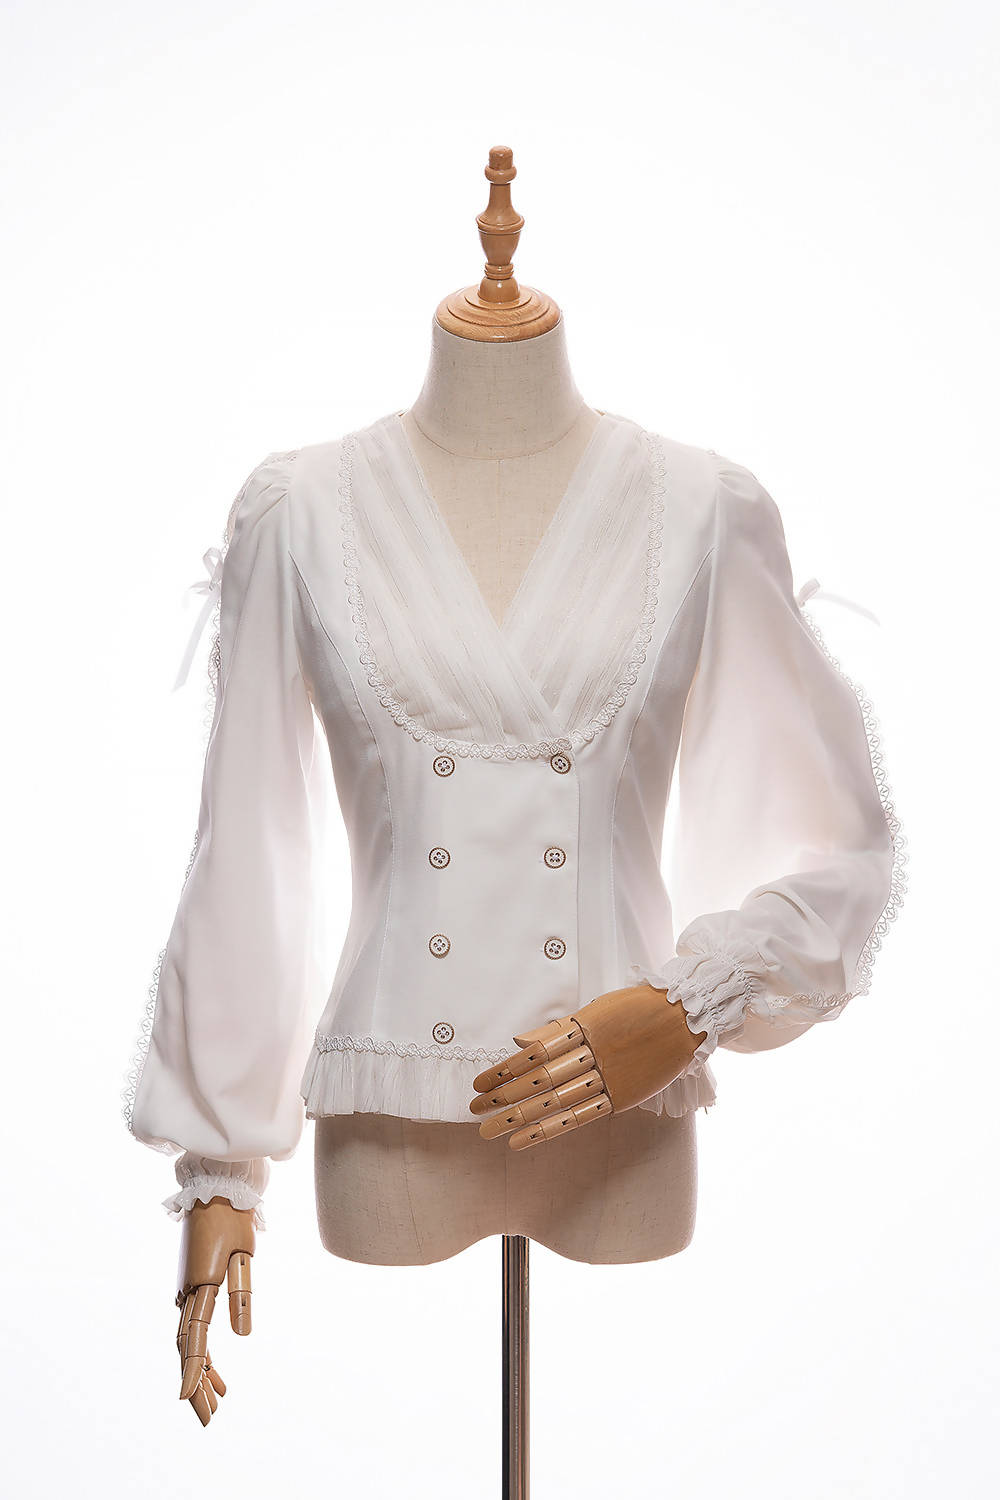 Another Story of Salome - Blouse 1 - V neck bishop sleeves blouse - Lolita Collective